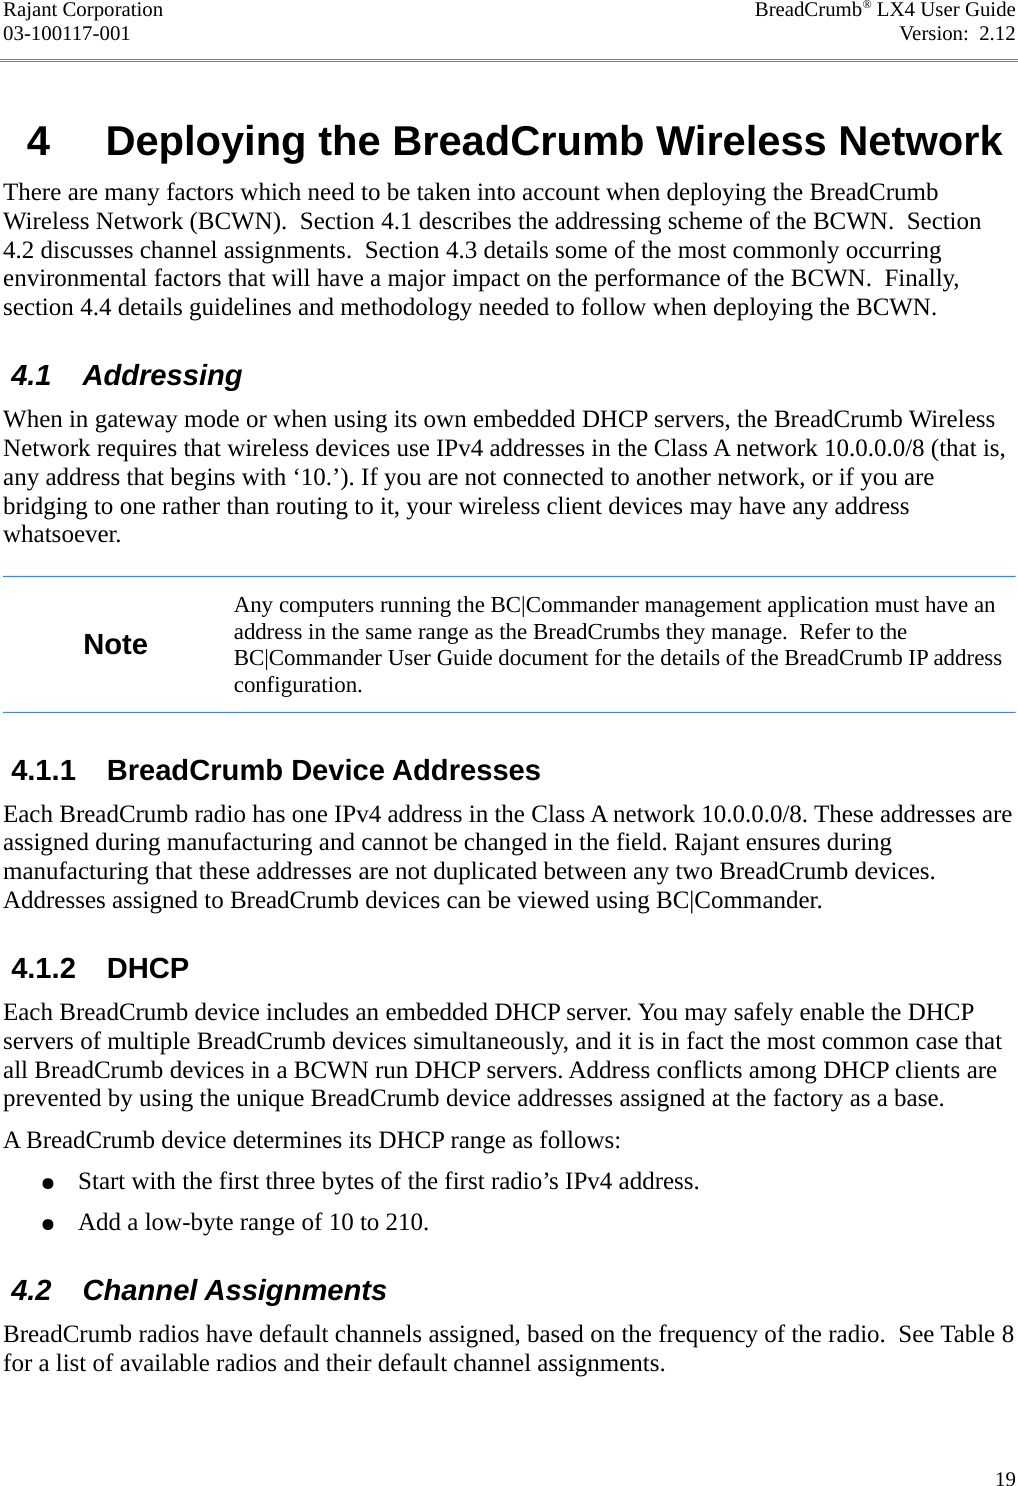 Rajant Corporation BreadCrumb® LX4 User Guide03-100117-001 Version:  2.12 4  Deploying the BreadCrumb Wireless NetworkThere are many factors which need to be taken into account when deploying the BreadCrumb Wireless Network (BCWN).  Section 4.1 describes the addressing scheme of the BCWN.  Section 4.2 discusses channel assignments.  Section 4.3 details some of the most commonly occurring environmental factors that will have a major impact on the performance of the BCWN.  Finally, section 4.4 details guidelines and methodology needed to follow when deploying the BCWN. 4.1  AddressingWhen in gateway mode or when using its own embedded DHCP servers, the BreadCrumb Wireless Network requires that wireless devices use IPv4 addresses in the Class A network 10.0.0.0/8 (that is, any address that begins with ‘10.’). If you are not connected to another network, or if you are bridging to one rather than routing to it, your wireless client devices may have any address whatsoever.NoteAny computers running the BC|Commander management application must have an address in the same range as the BreadCrumbs they manage.  Refer to the BC|Commander User Guide document for the details of the BreadCrumb IP address configuration. 4.1.1  BreadCrumb Device AddressesEach BreadCrumb radio has one IPv4 address in the Class A network 10.0.0.0/8. These addresses are assigned during manufacturing and cannot be changed in the field. Rajant ensures during manufacturing that these addresses are not duplicated between any two BreadCrumb devices. Addresses assigned to BreadCrumb devices can be viewed using BC|Commander. 4.1.2  DHCPEach BreadCrumb device includes an embedded DHCP server. You may safely enable the DHCP servers of multiple BreadCrumb devices simultaneously, and it is in fact the most common case that all BreadCrumb devices in a BCWN run DHCP servers. Address conflicts among DHCP clients are prevented by using the unique BreadCrumb device addresses assigned at the factory as a base.A BreadCrumb device determines its DHCP range as follows:●Start with the first three bytes of the first radio’s IPv4 address.●Add a low-byte range of 10 to 210. 4.2  Channel AssignmentsBreadCrumb radios have default channels assigned, based on the frequency of the radio.  See Table 8 for a list of available radios and their default channel assignments.19